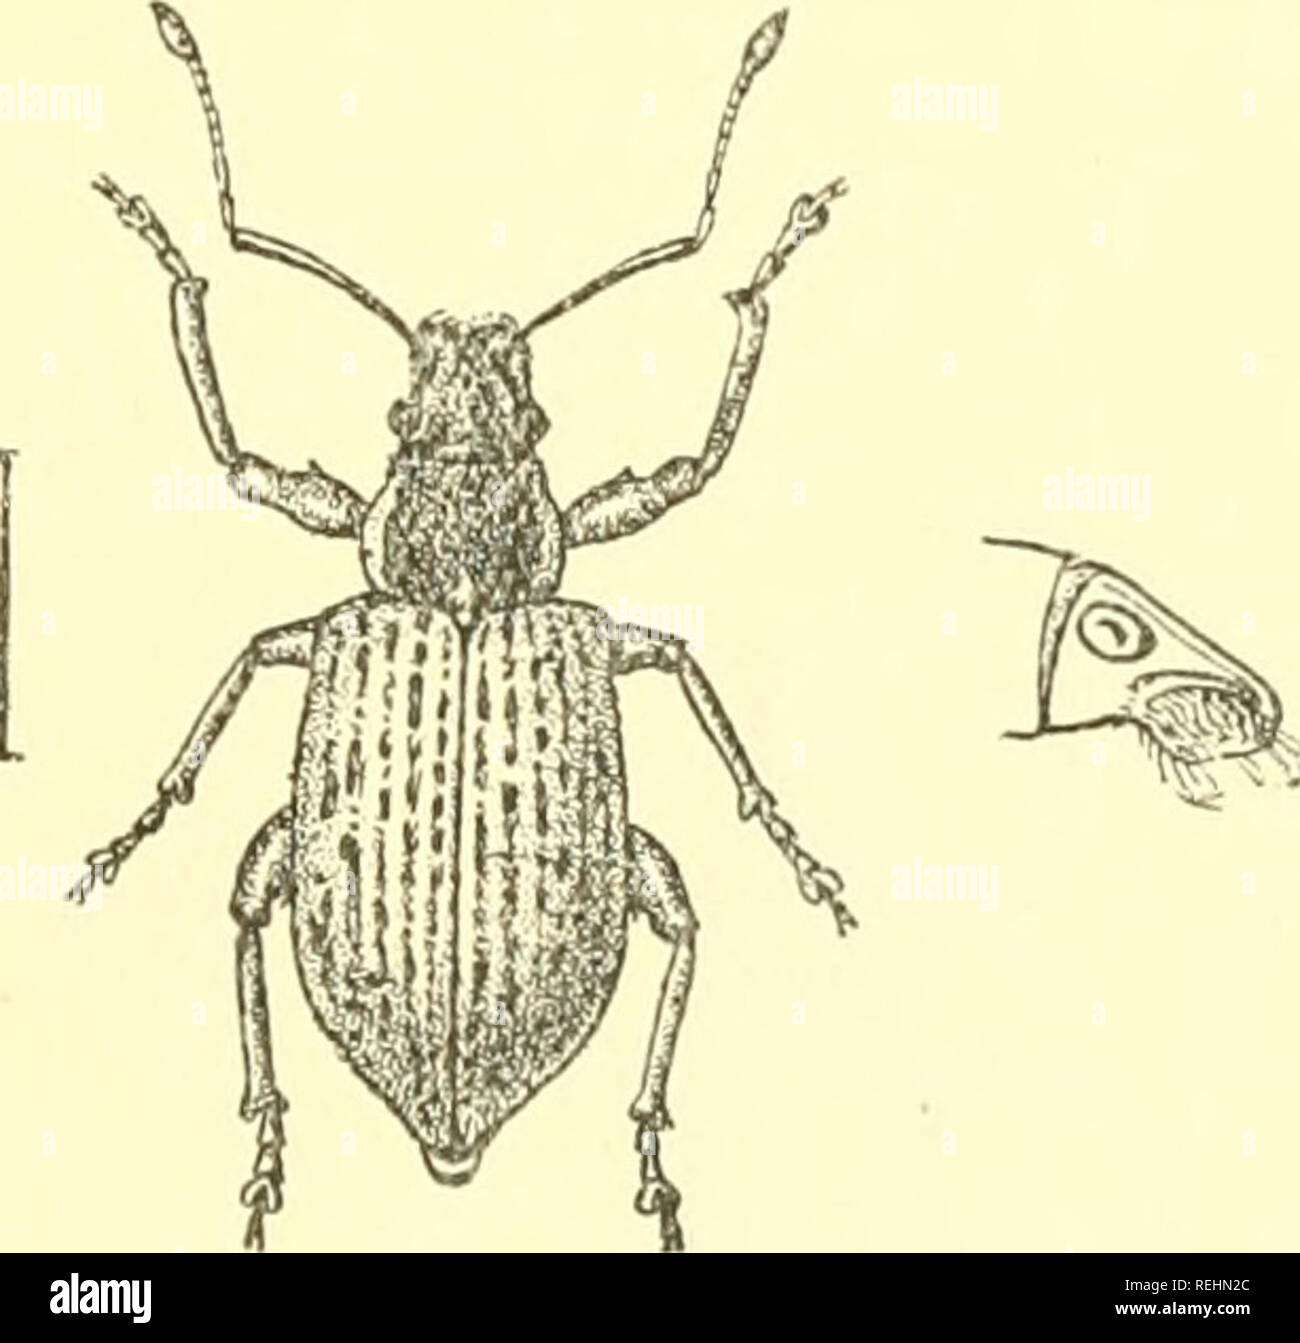 Coleoptera. Rhynchophora:-Curculionidæ,. Curculionidae. MYLLOCERUS. 337  distinguished, among other characters, by having only one tooth on the  posterior femora instead of three. Mr. Lefroy informs me that this species  devours the vouug